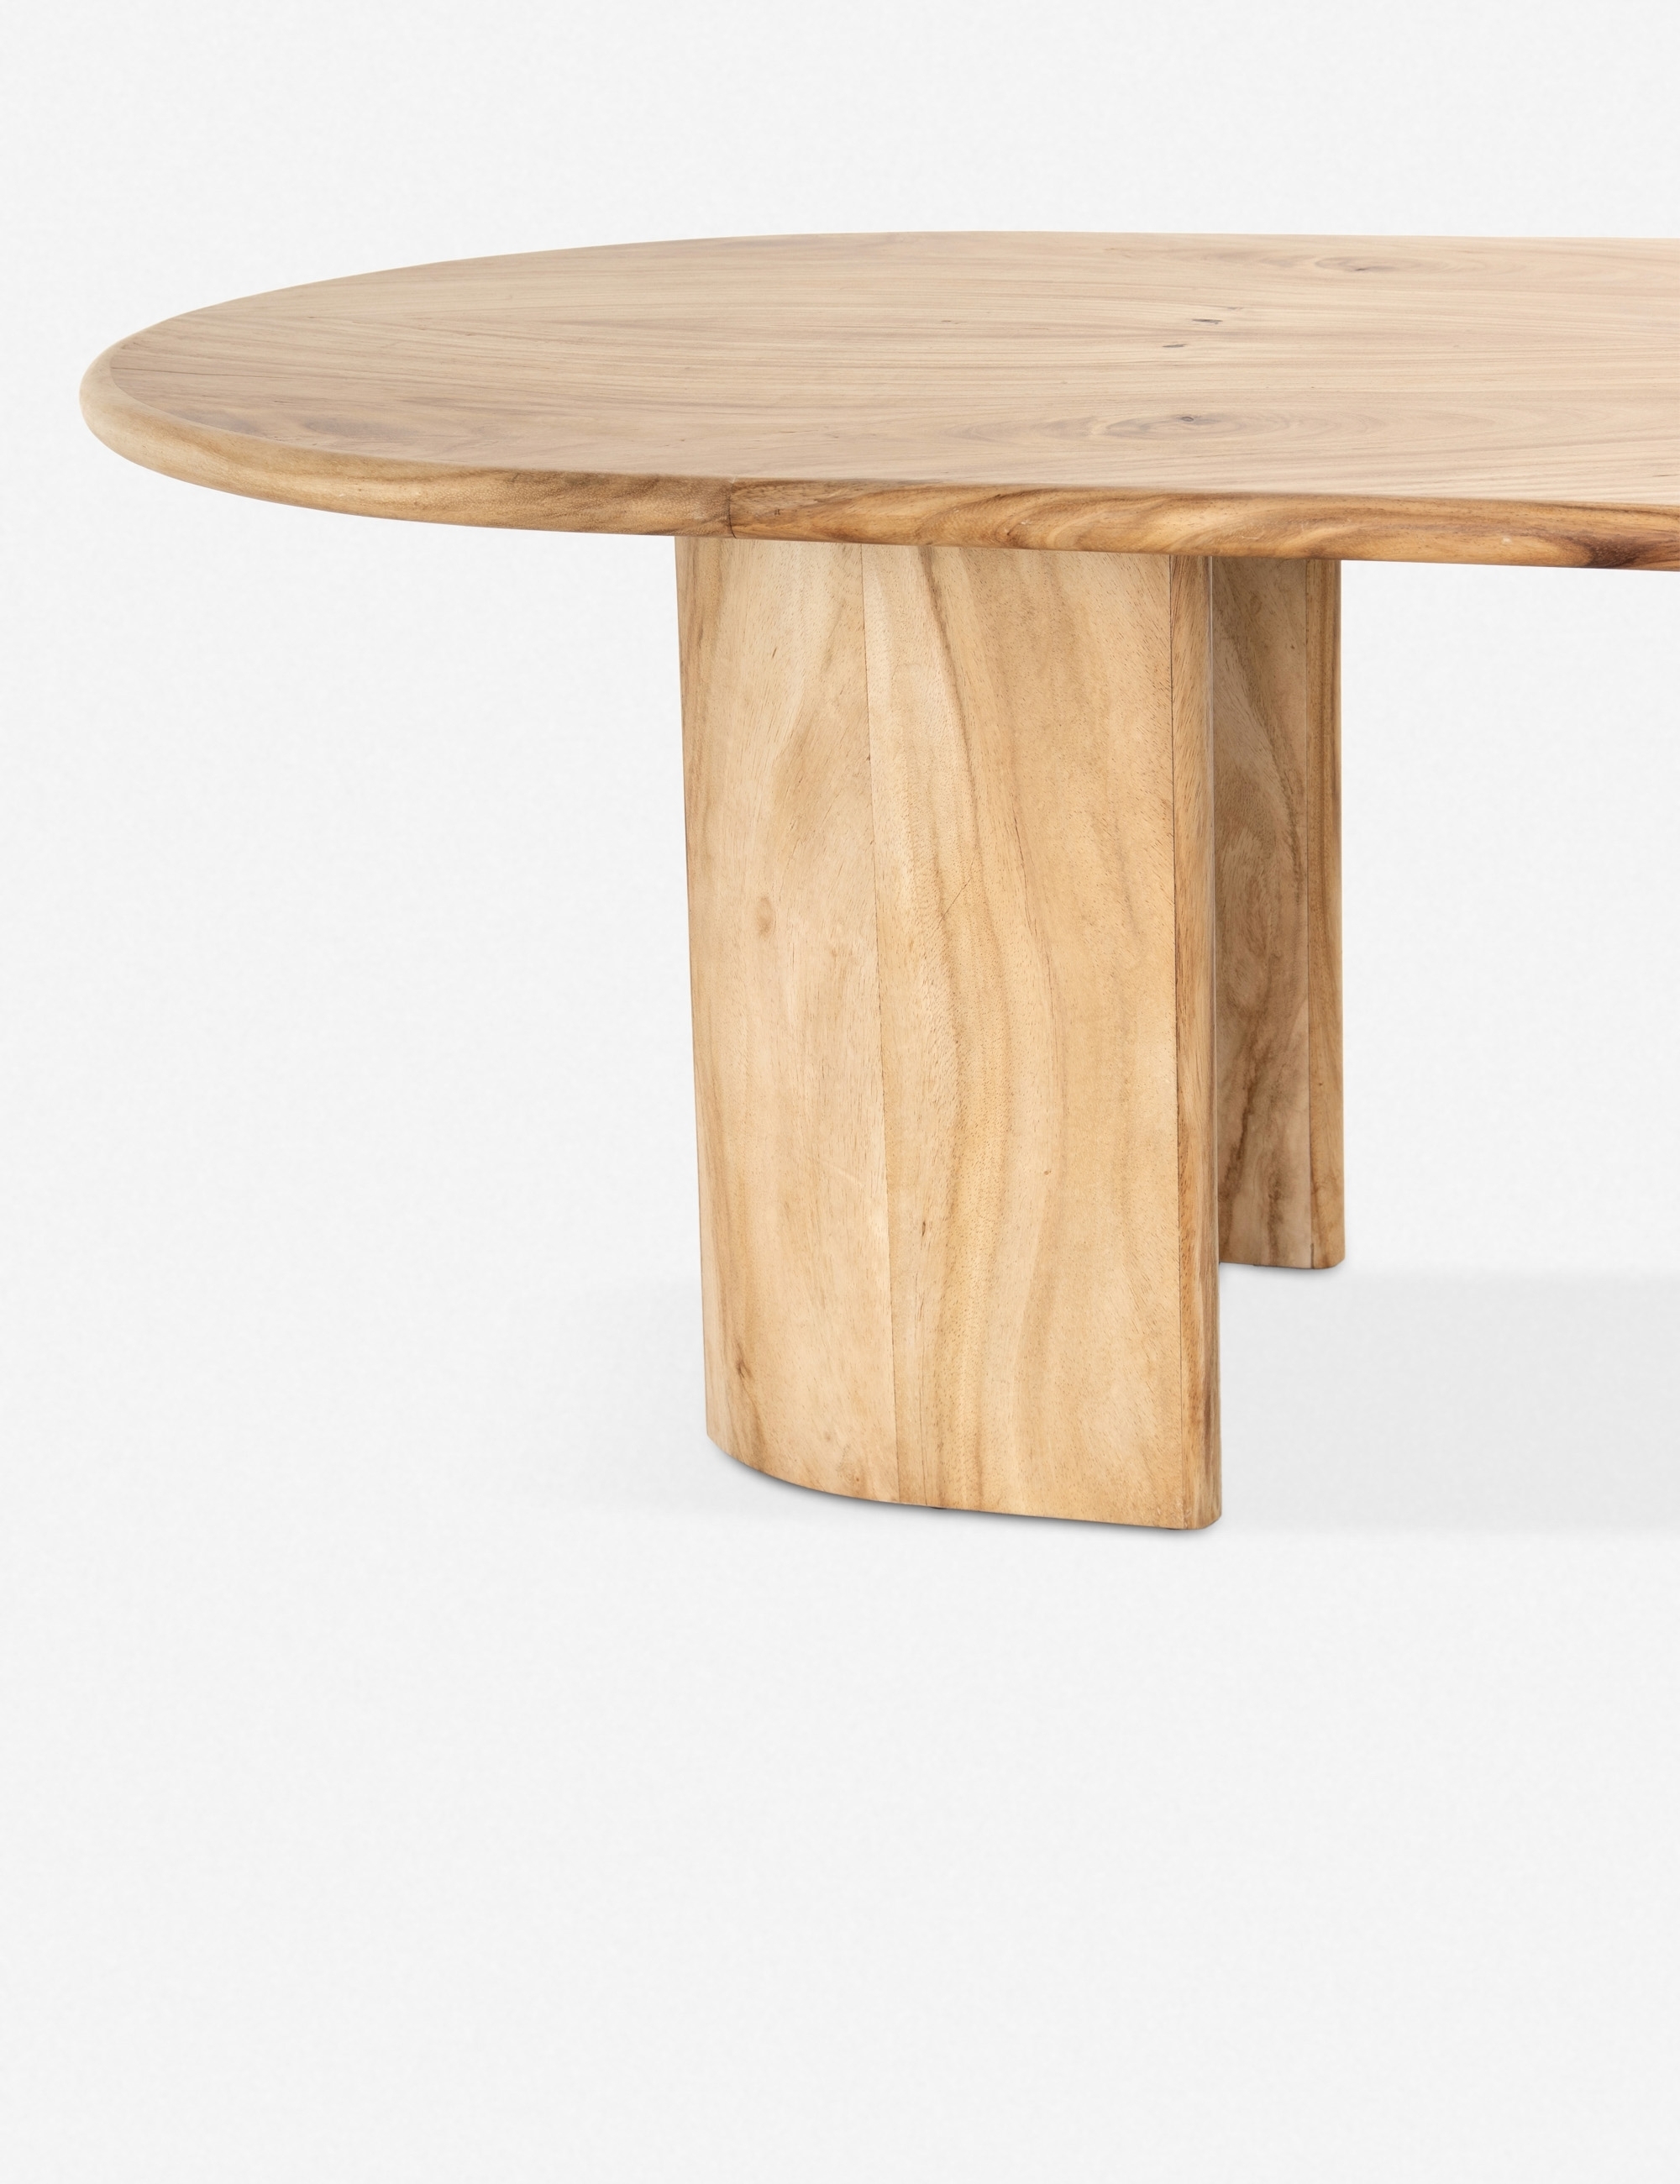 Nausica Oval Dining Table - Image 4